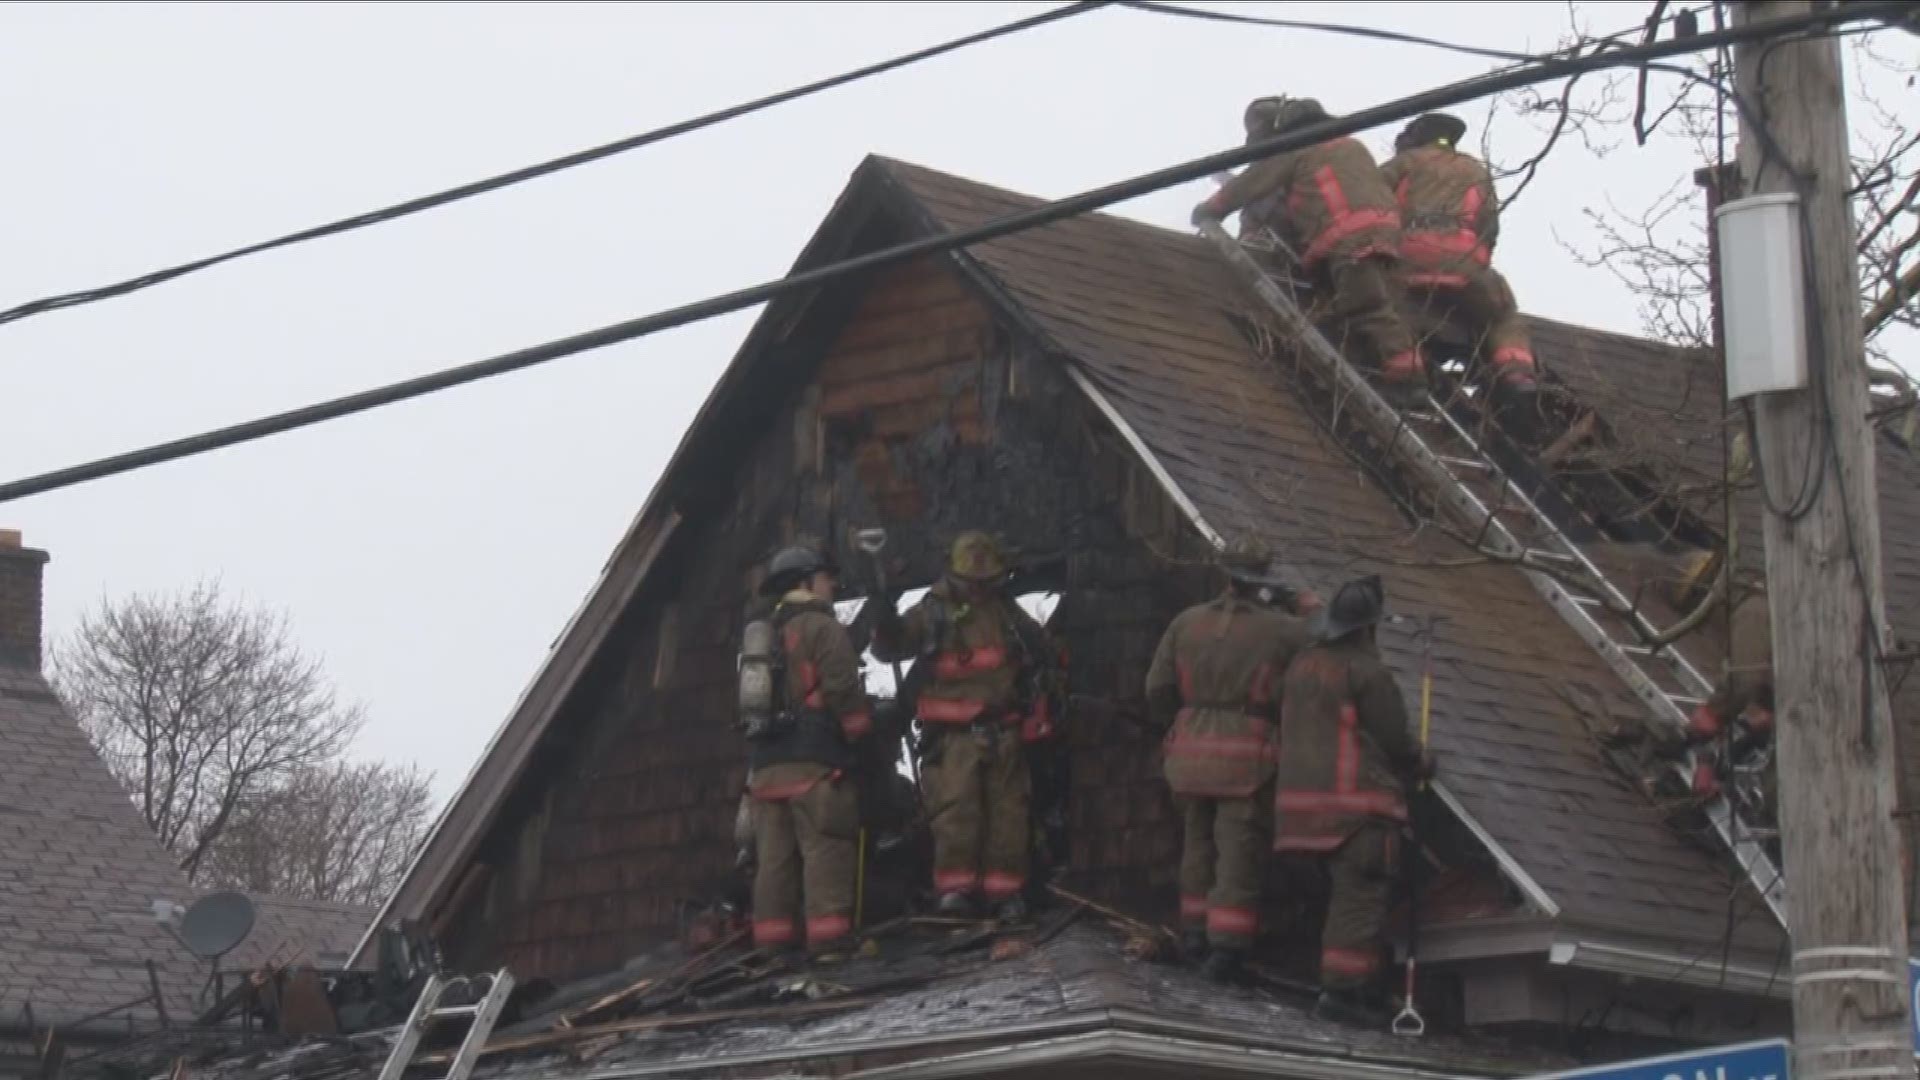 firefighters couldn't find any working smoke detectors in the home